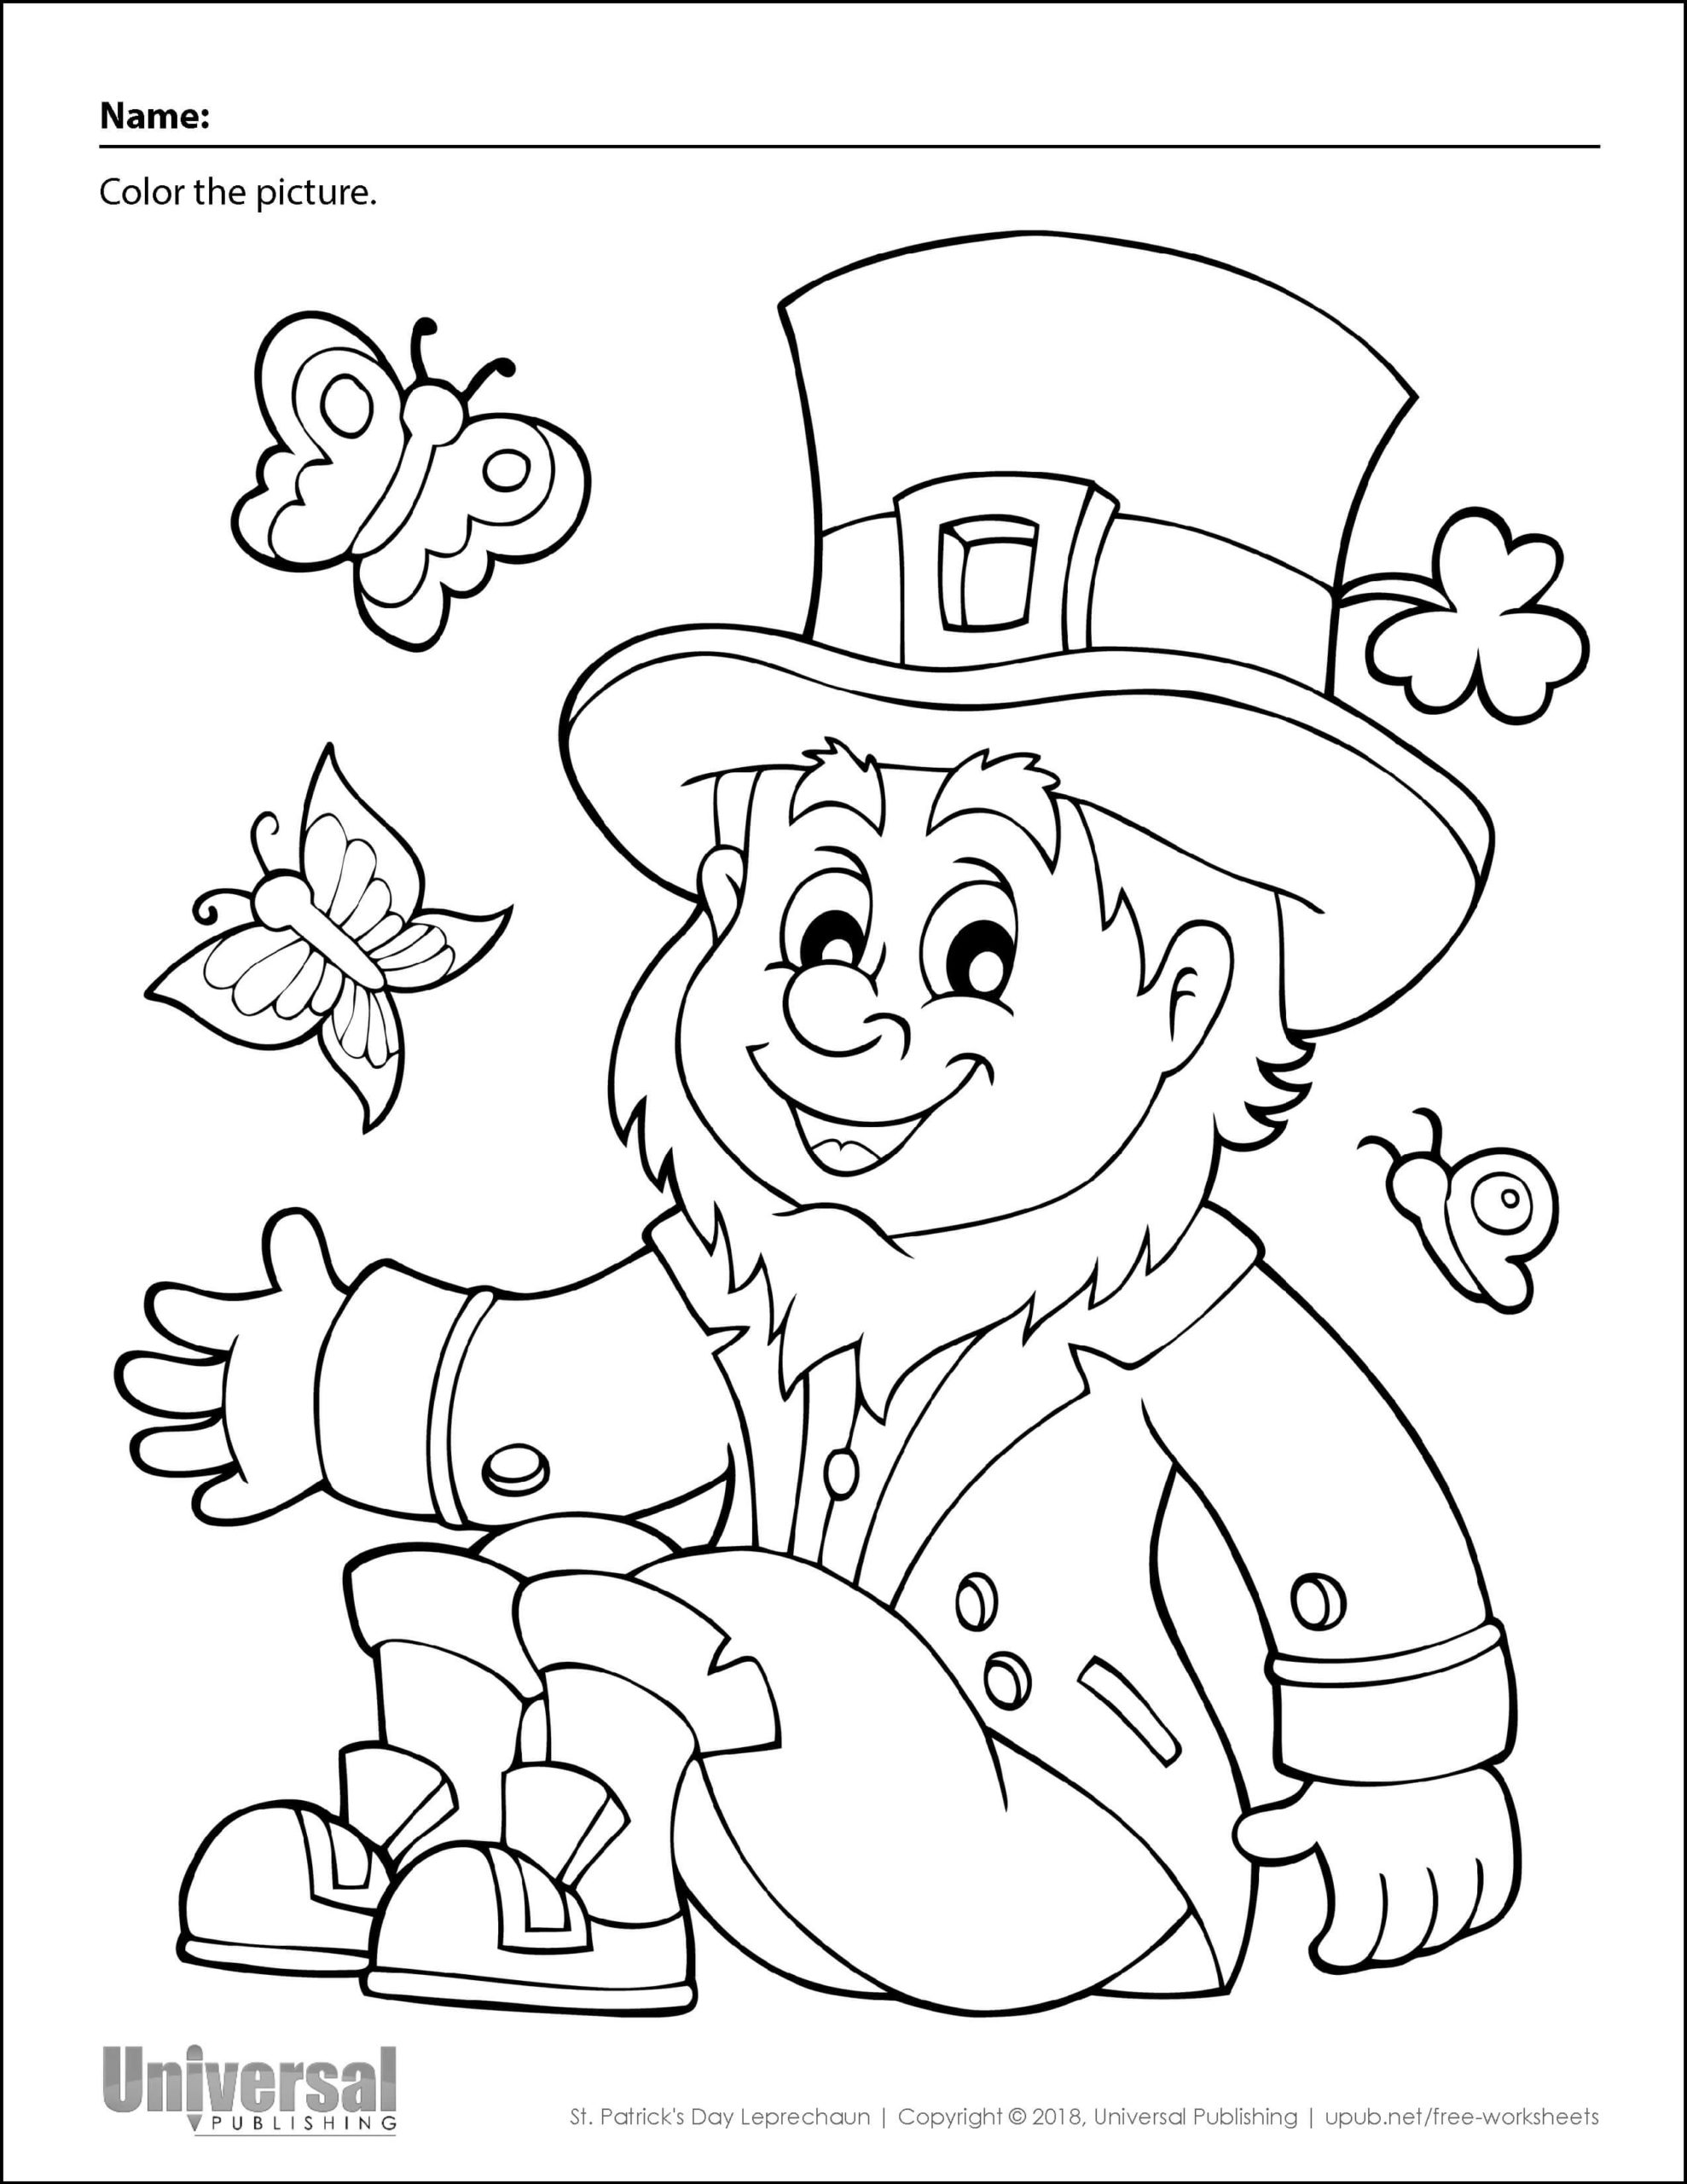 st patricks day pictures to print | st patricks day shamrock coloring page | st patrick's day coloring pages